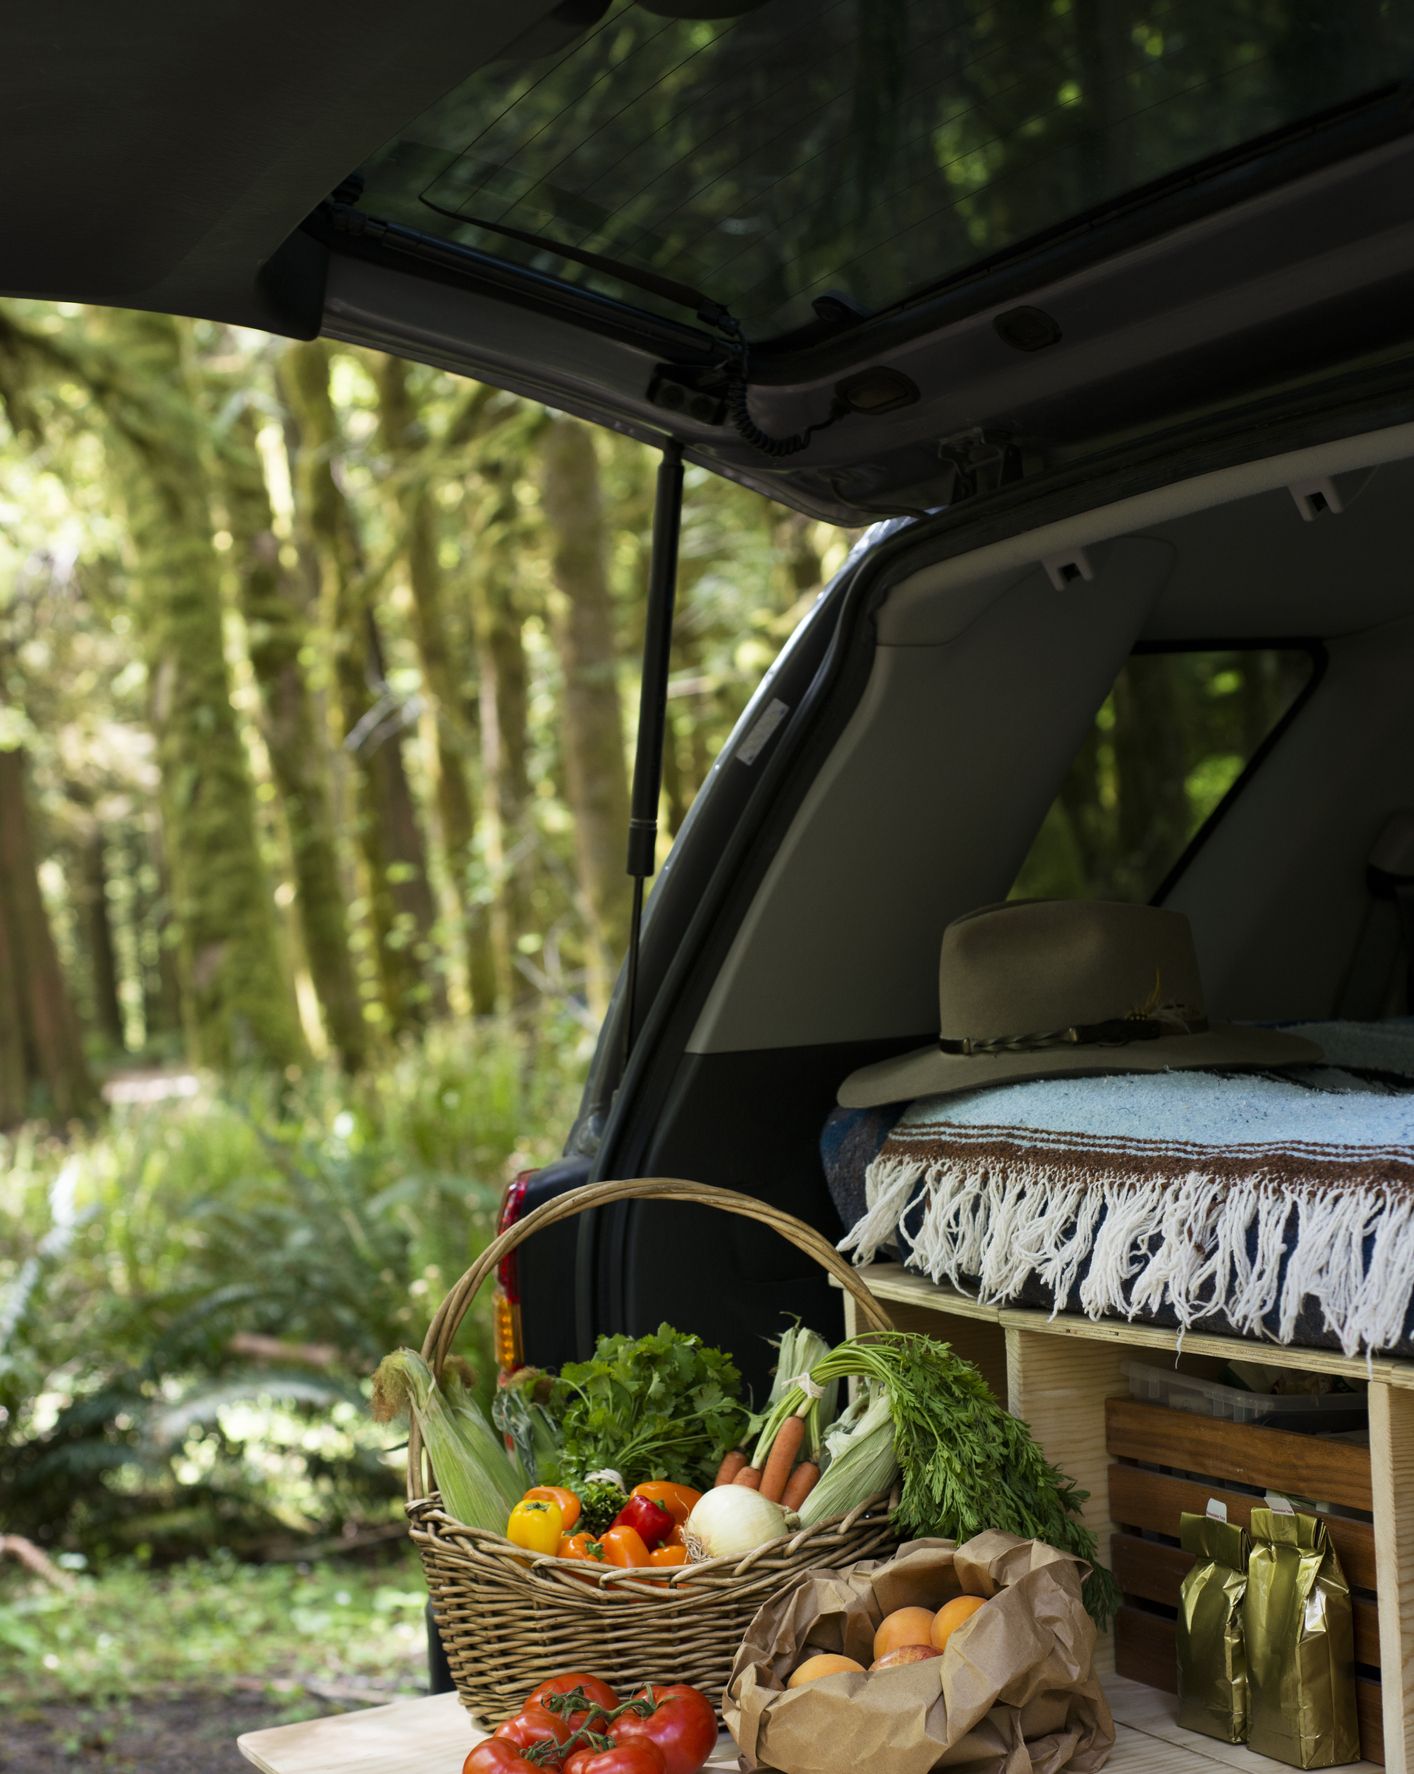 20+ Car Camping Tips and Ideas Best Tricks for Sleeping in Your Car